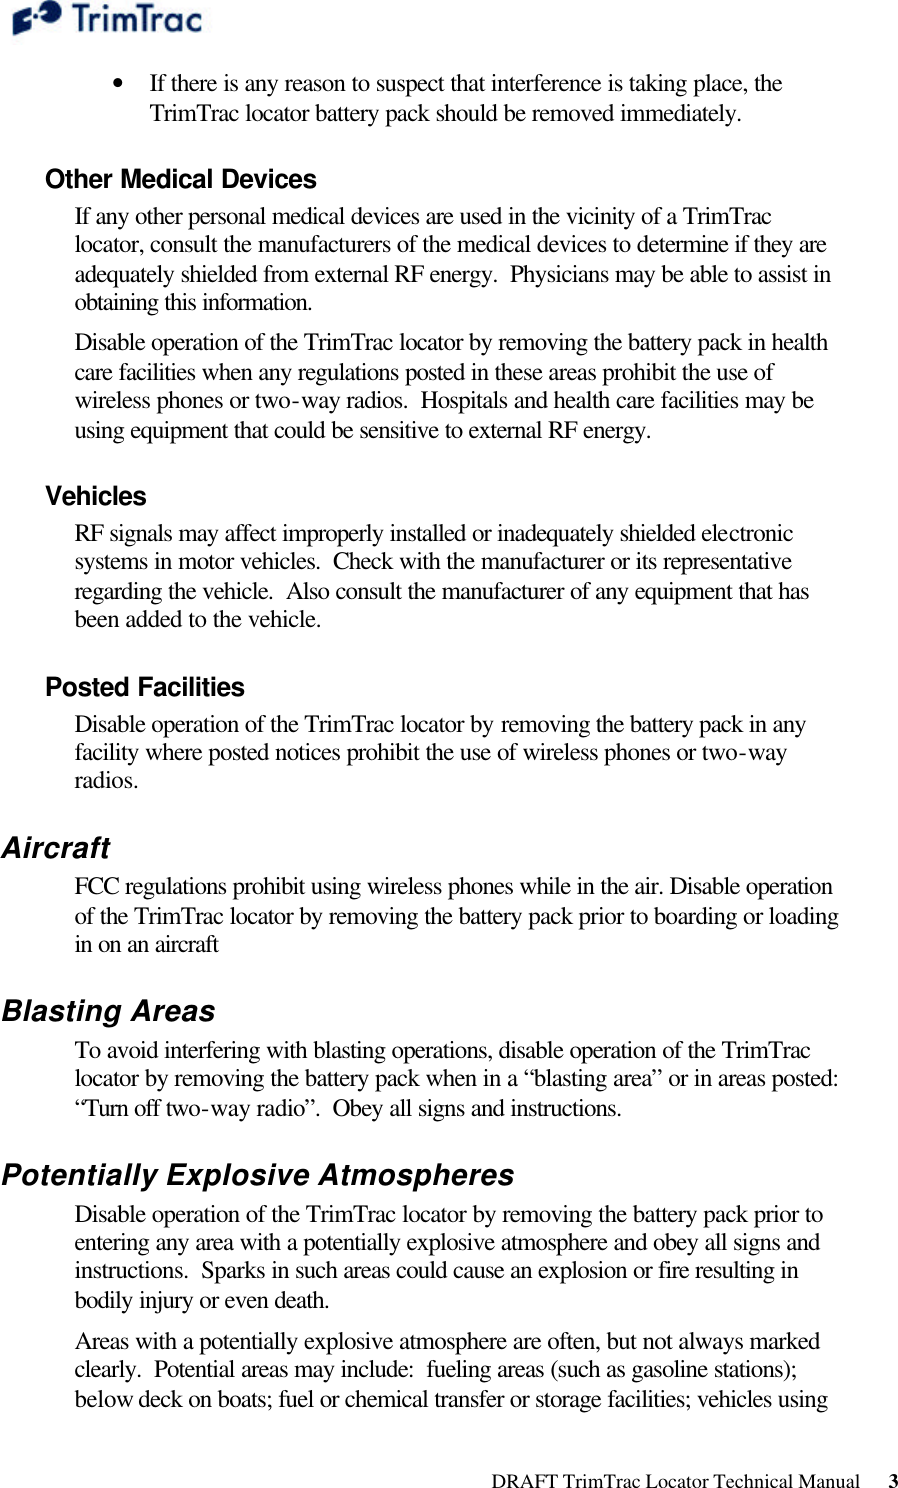  DRAFT TrimTrac Locator Technical Manual      3 • If there is any reason to suspect that interference is taking place, the TrimTrac locator battery pack should be removed immediately. Other Medical Devices If any other personal medical devices are used in the vicinity of a TrimTrac locator, consult the manufacturers of the medical devices to determine if they are adequately shielded from external RF energy.  Physicians may be able to assist in obtaining this information. Disable operation of the TrimTrac locator by removing the battery pack in health care facilities when any regulations posted in these areas prohibit the use of wireless phones or two-way radios.  Hospitals and health care facilities may be using equipment that could be sensitive to external RF energy. Vehicles RF signals may affect improperly installed or inadequately shielded electronic systems in motor vehicles.  Check with the manufacturer or its representative regarding the vehicle.  Also consult the manufacturer of any equipment that has been added to the vehicle. Posted Facilities Disable operation of the TrimTrac locator by removing the battery pack in any facility where posted notices prohibit the use of wireless phones or two-way radios. Aircraft FCC regulations prohibit using wireless phones while in the air. Disable operation of the TrimTrac locator by removing the battery pack prior to boarding or loading in on an aircraft Blasting Areas  To avoid interfering with blasting operations, disable operation of the TrimTrac locator by removing the battery pack when in a “blasting area” or in areas posted:  “Turn off two-way radio”.  Obey all signs and instructions. Potentially Explosive Atmospheres Disable operation of the TrimTrac locator by removing the battery pack prior to entering any area with a potentially explosive atmosphere and obey all signs and instructions.  Sparks in such areas could cause an explosion or fire resulting in bodily injury or even death. Areas with a potentially explosive atmosphere are often, but not always marked clearly.  Potential areas may include:  fueling areas (such as gasoline stations); below deck on boats; fuel or chemical transfer or storage facilities; vehicles using 